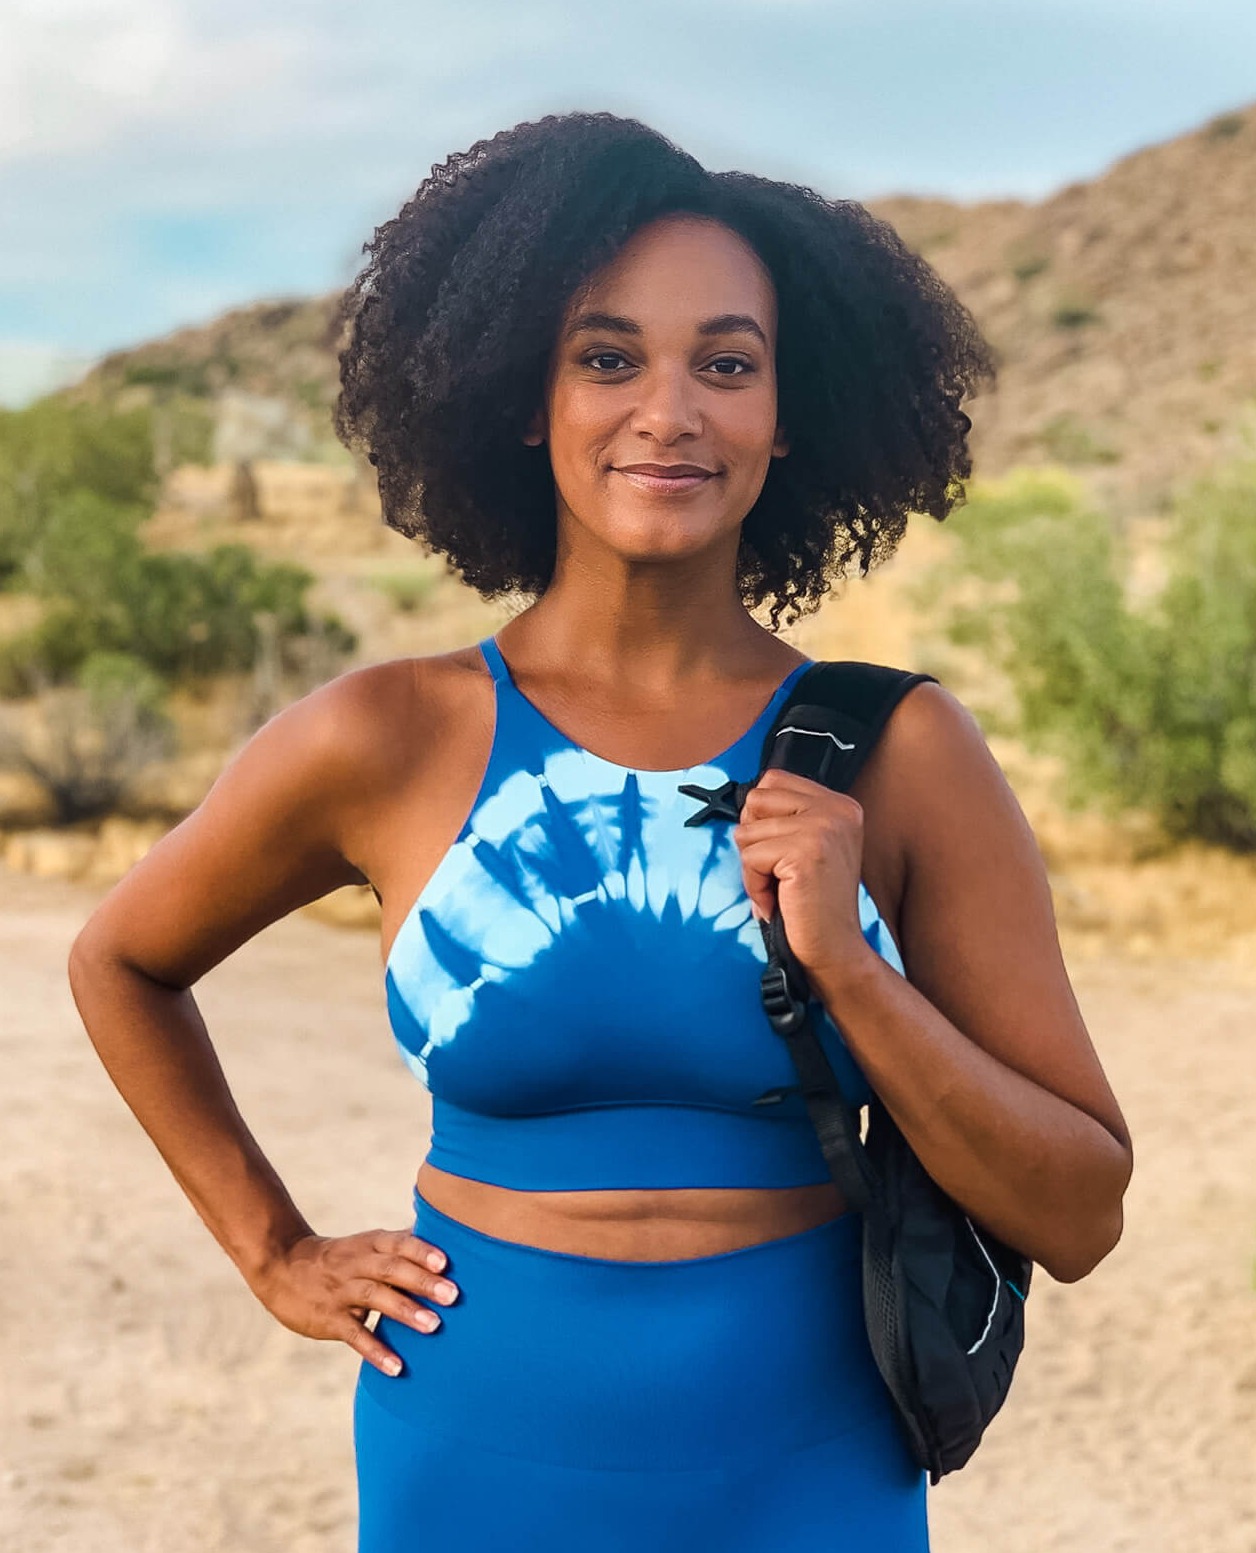 Black Hiker getting outdoors in Joshua Tree National Park holding a backpack, hand on her hip, wearing an afro